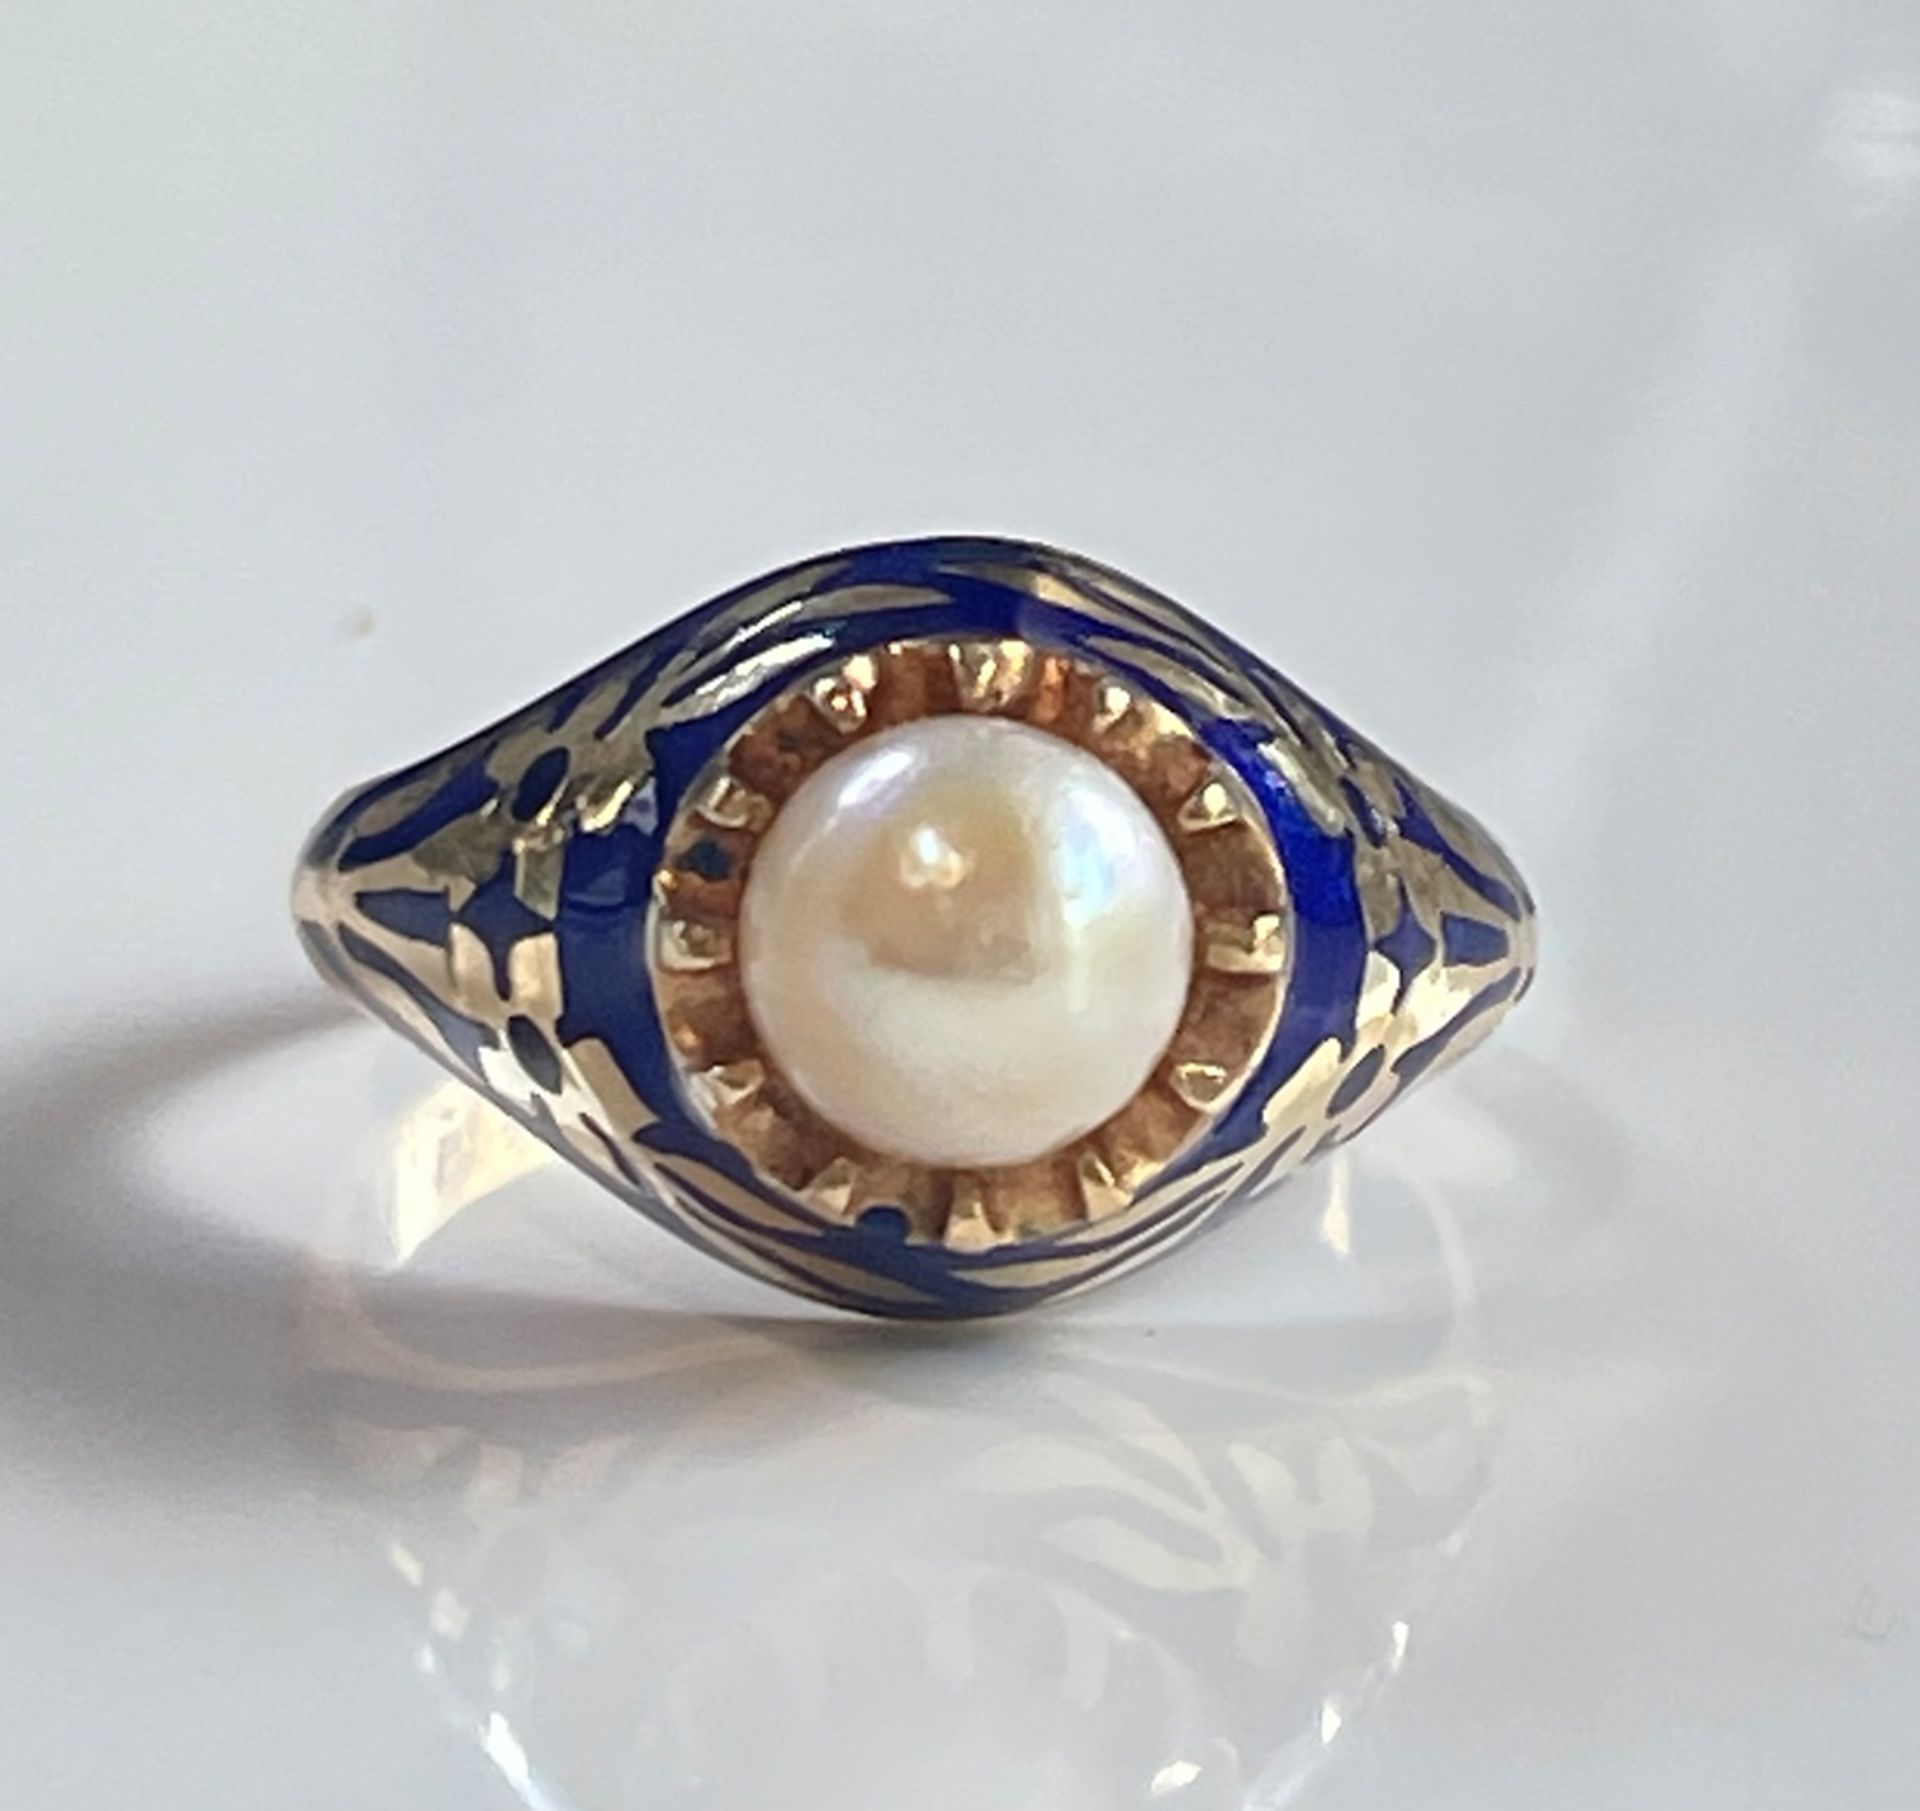 Antique ring of 18K Gold with Enamel and a Pearl - Image 2 of 5